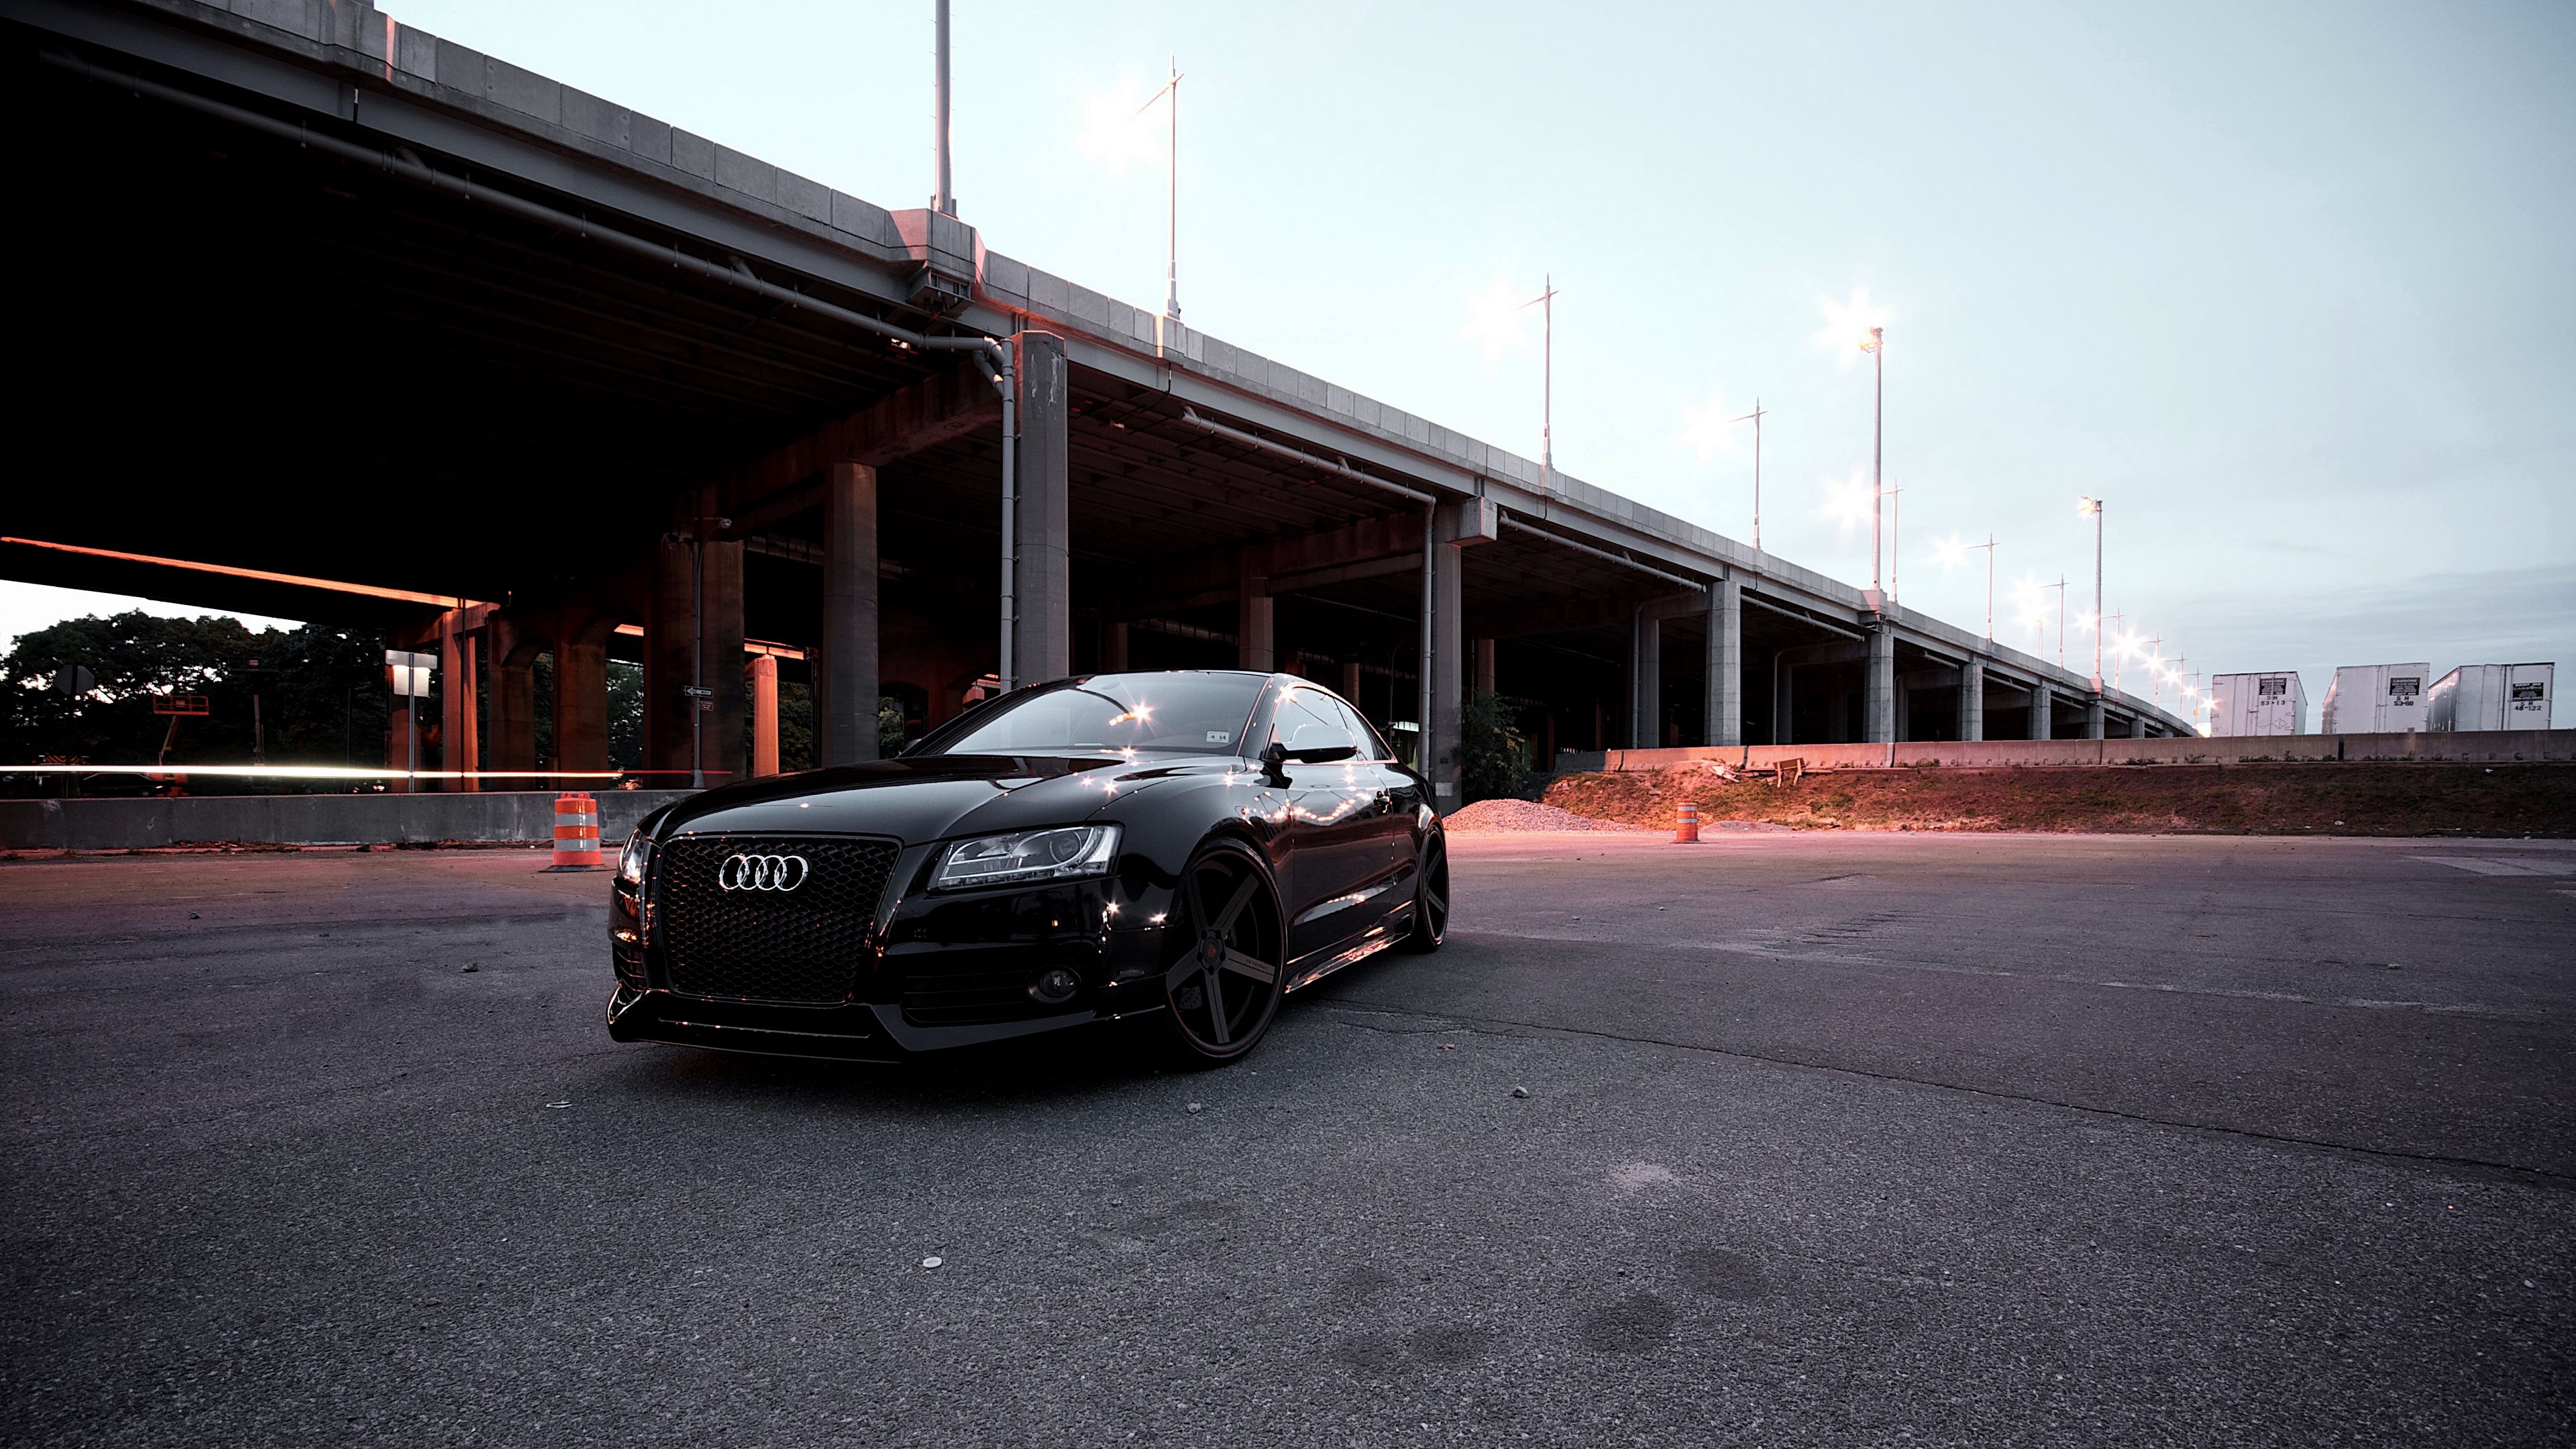 Download wallpaper 3840x2160 audi, rs5, tuning 4k uhd 16:9 hd background